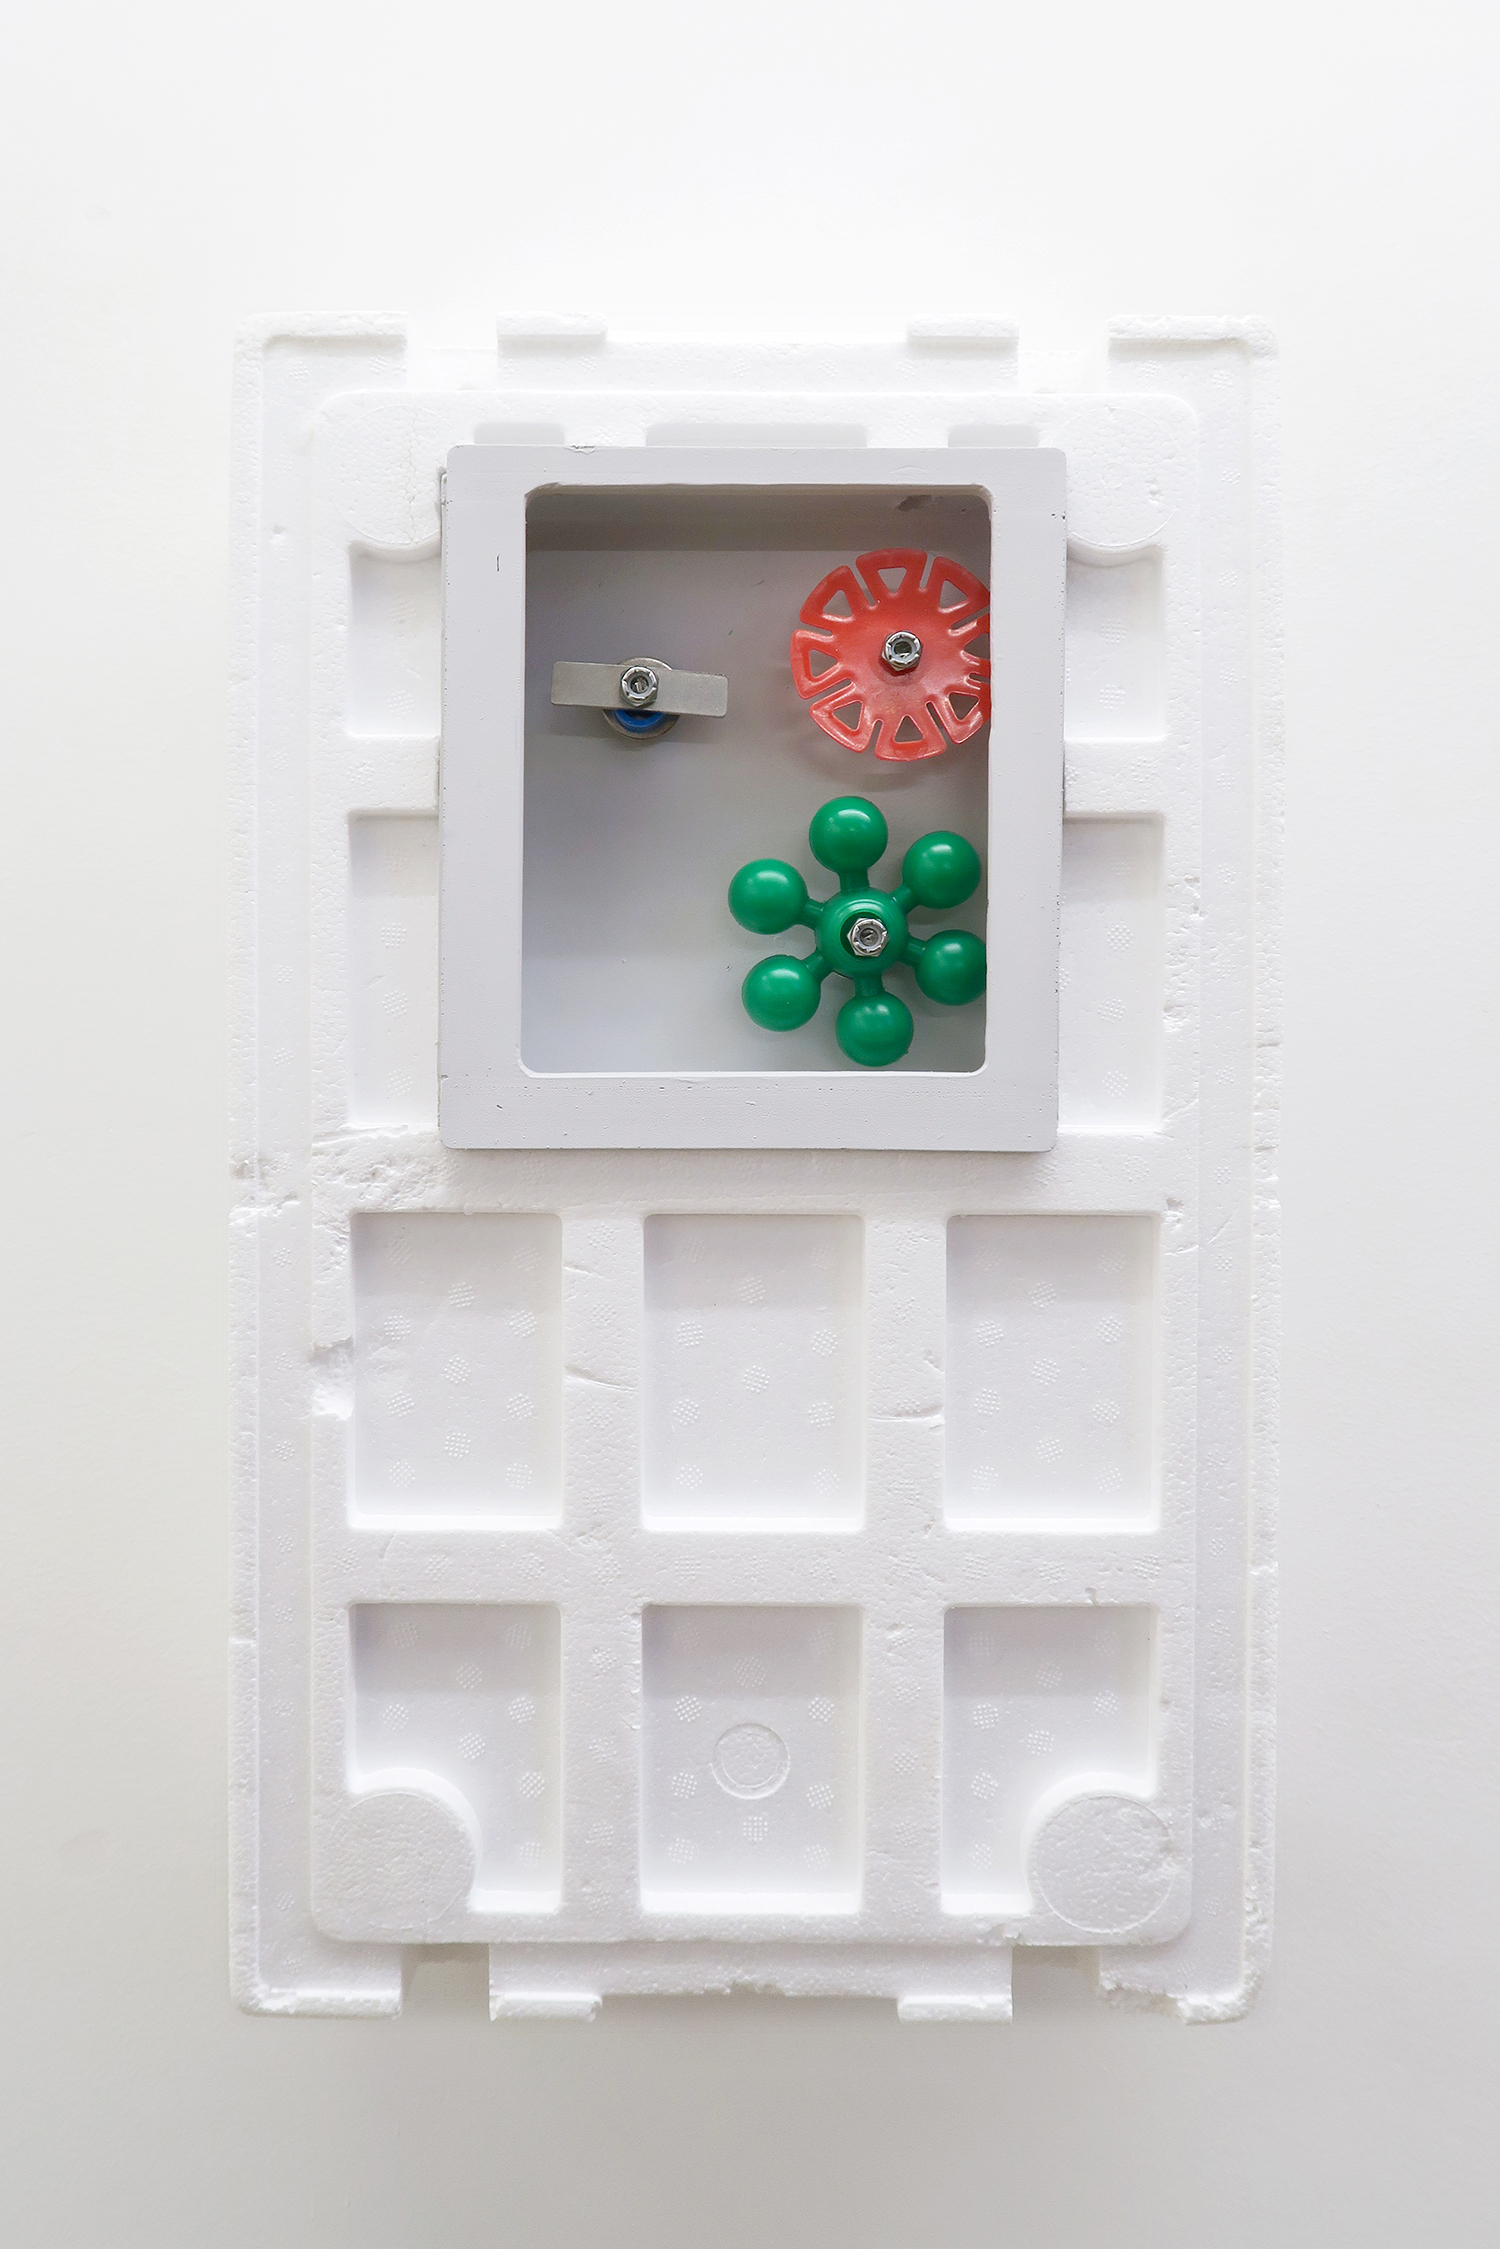 Simplify Complexity II, 2022 Styrofoam box, brightly colored plastic pieces spin easily on stainless steel rods, 30 × 49.8 × 14 cm